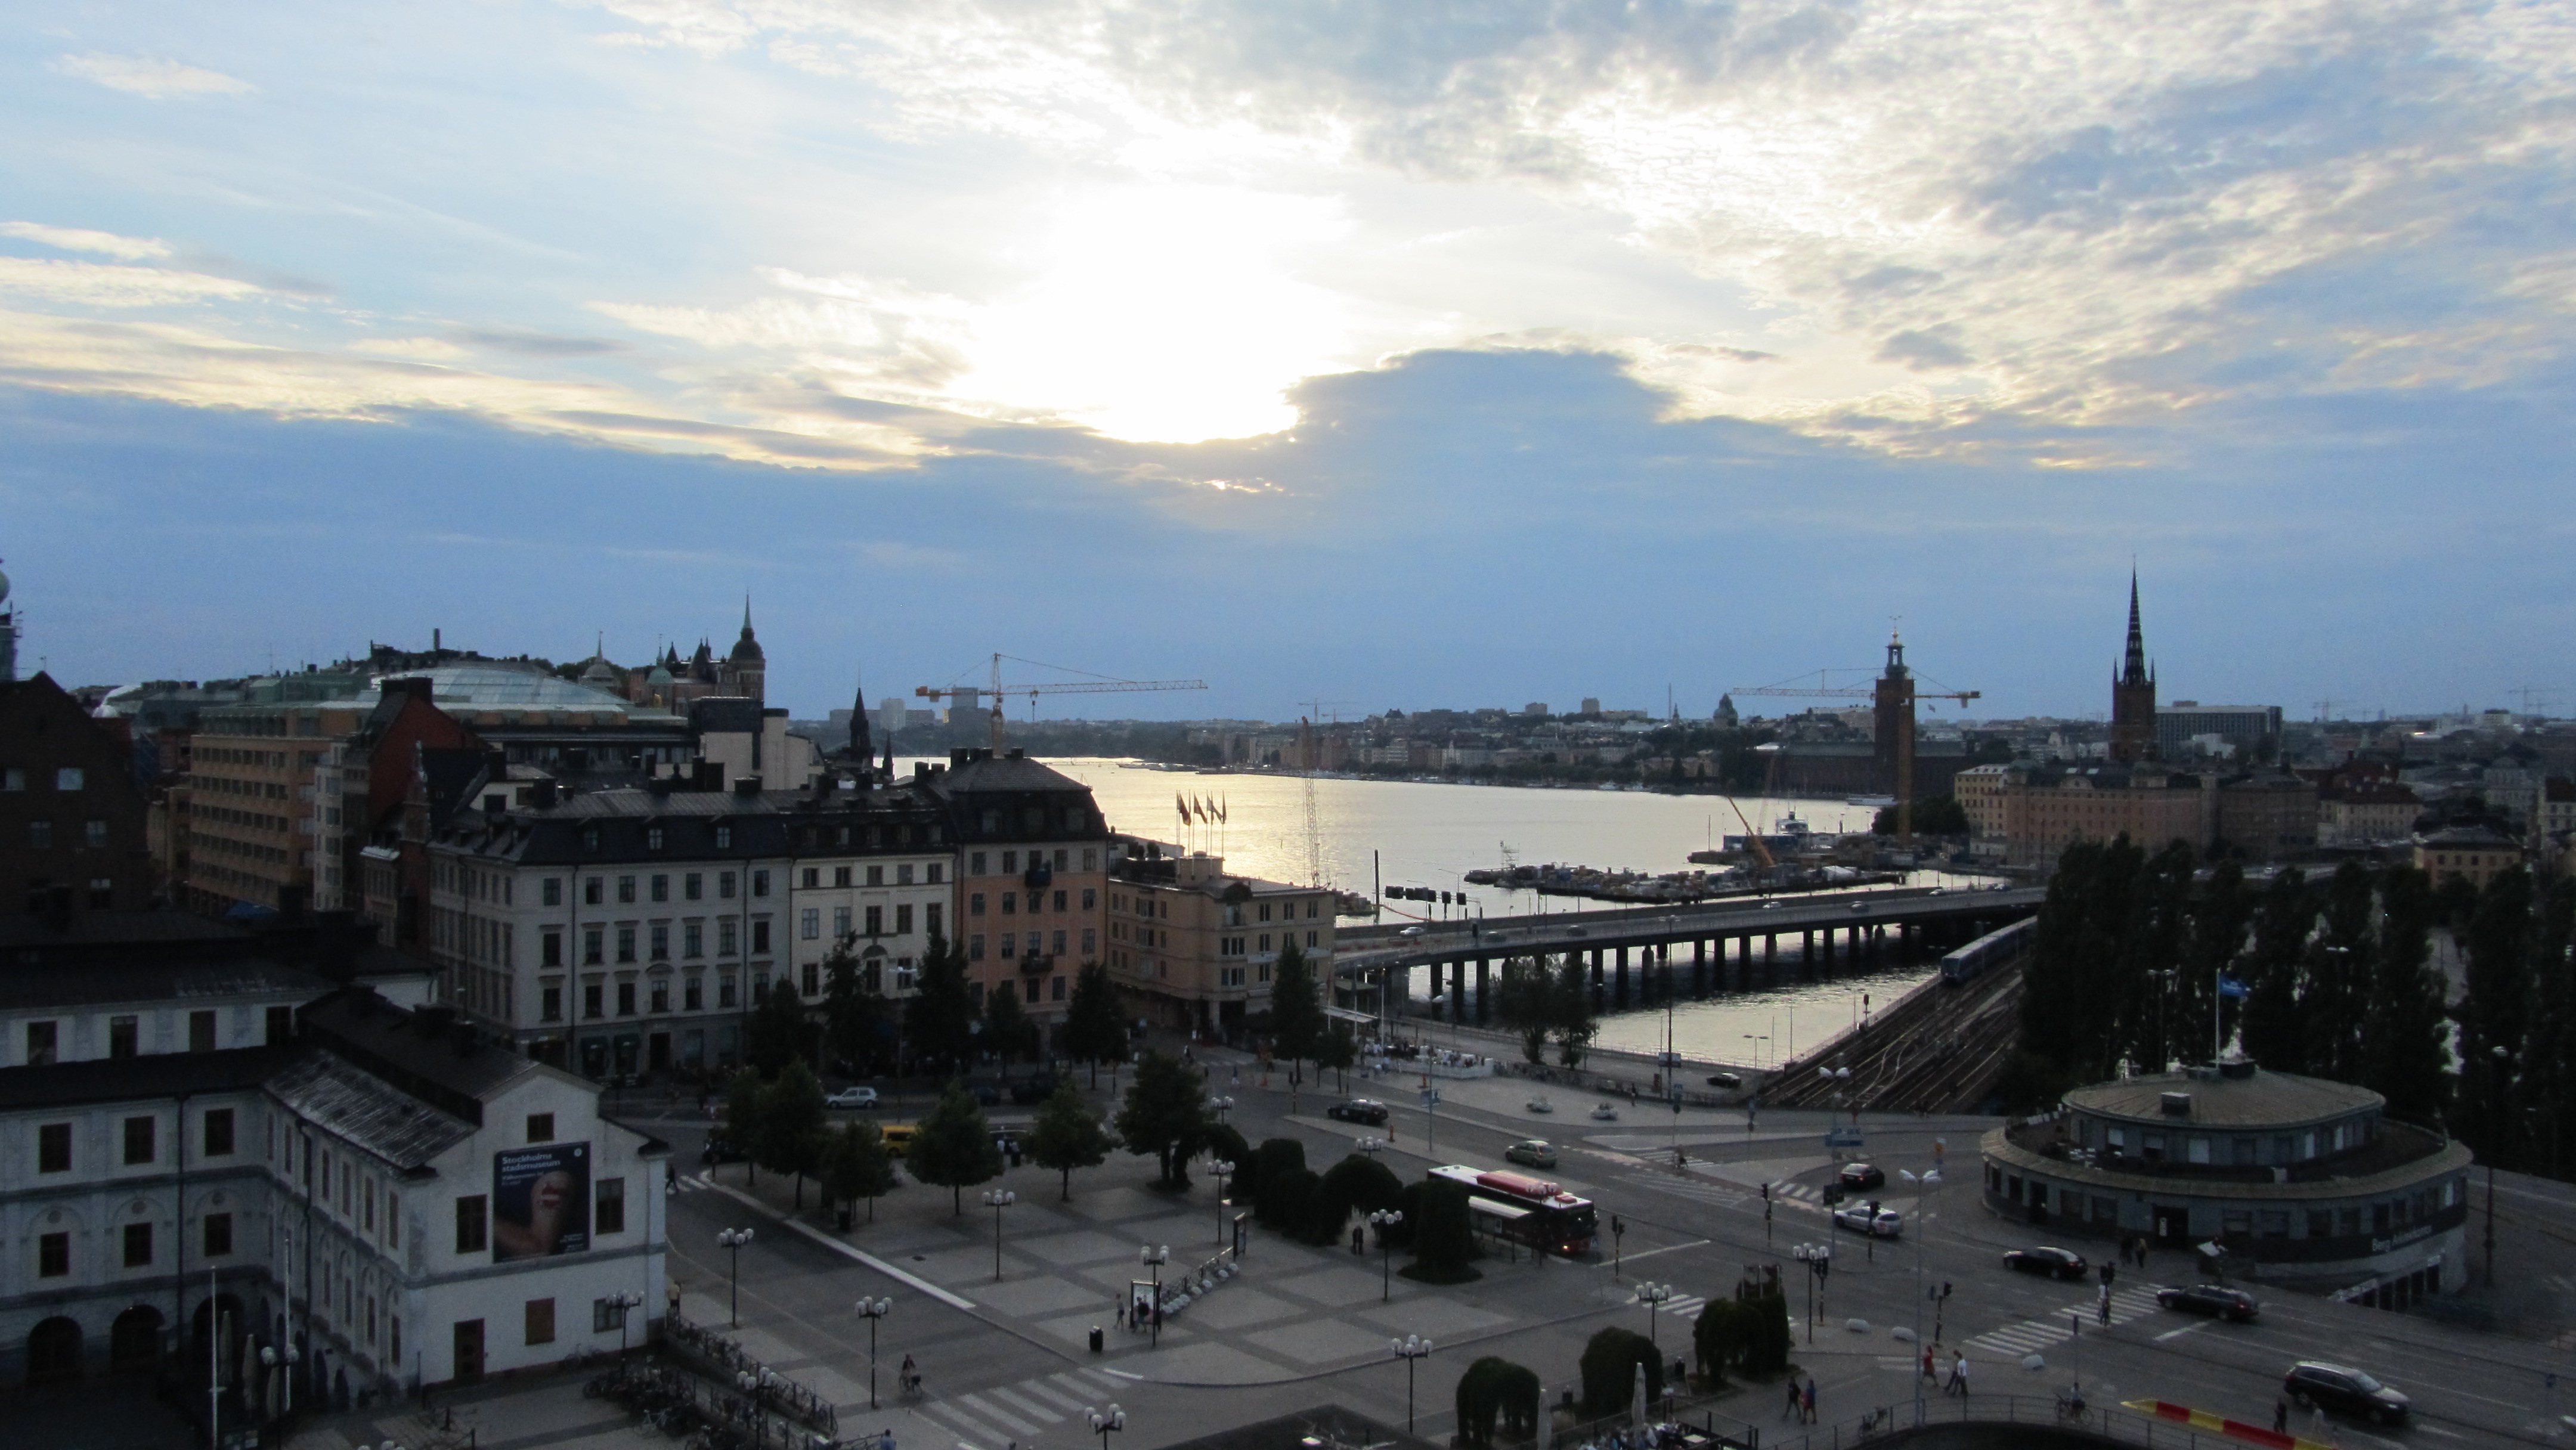 The view from Katarinahissen in Stockholm